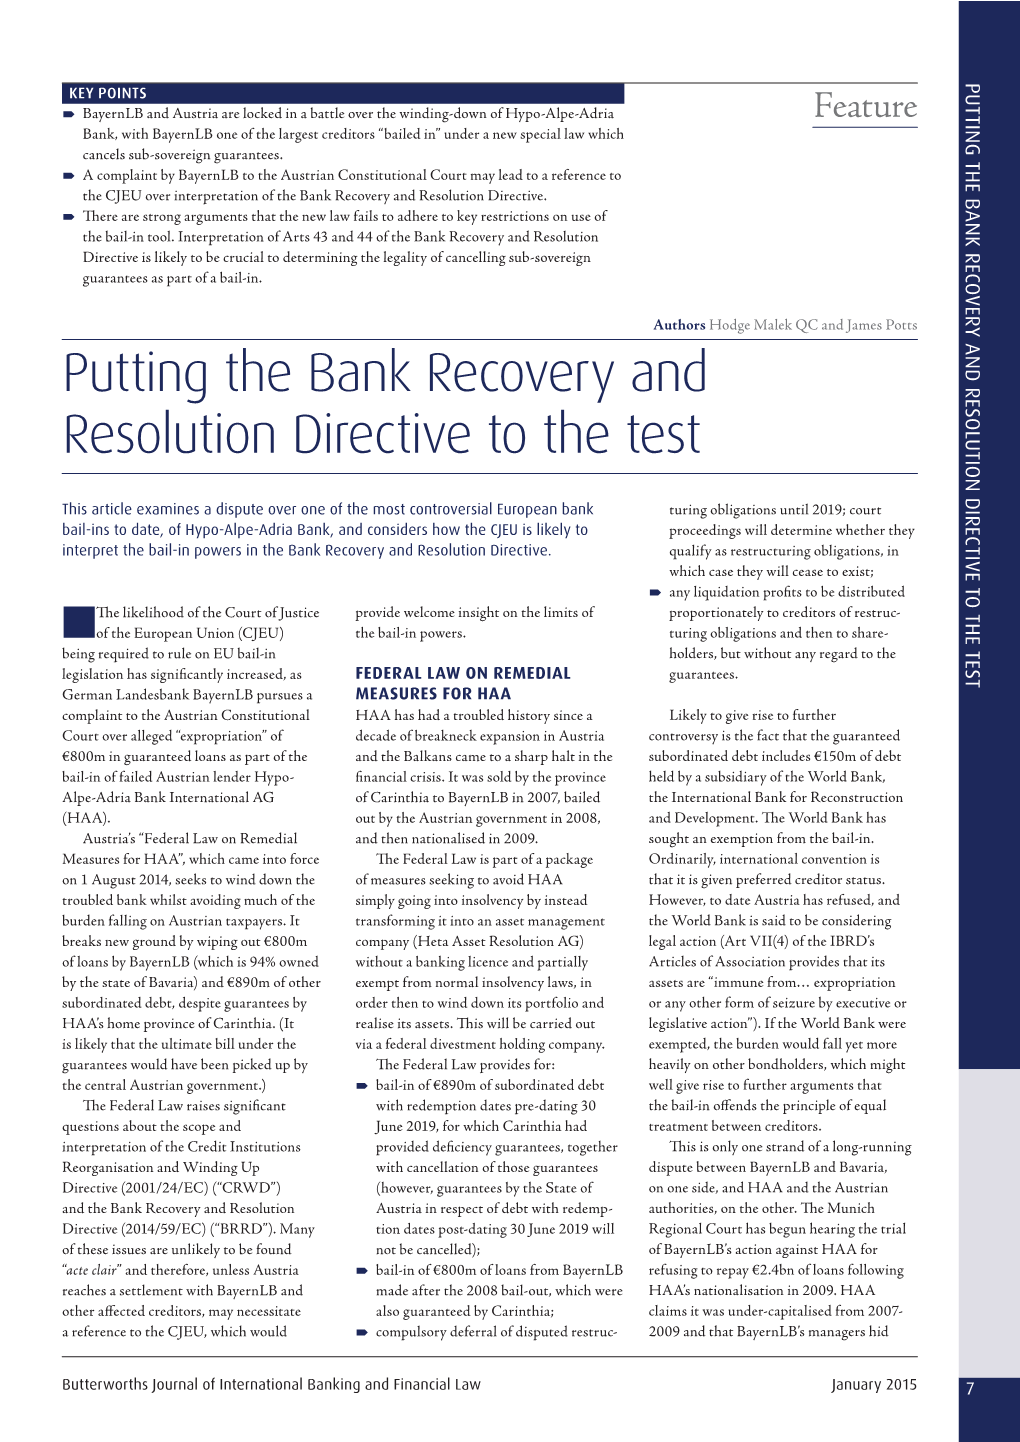 Putting the Bank Recovery and Resolution Directive to the Test